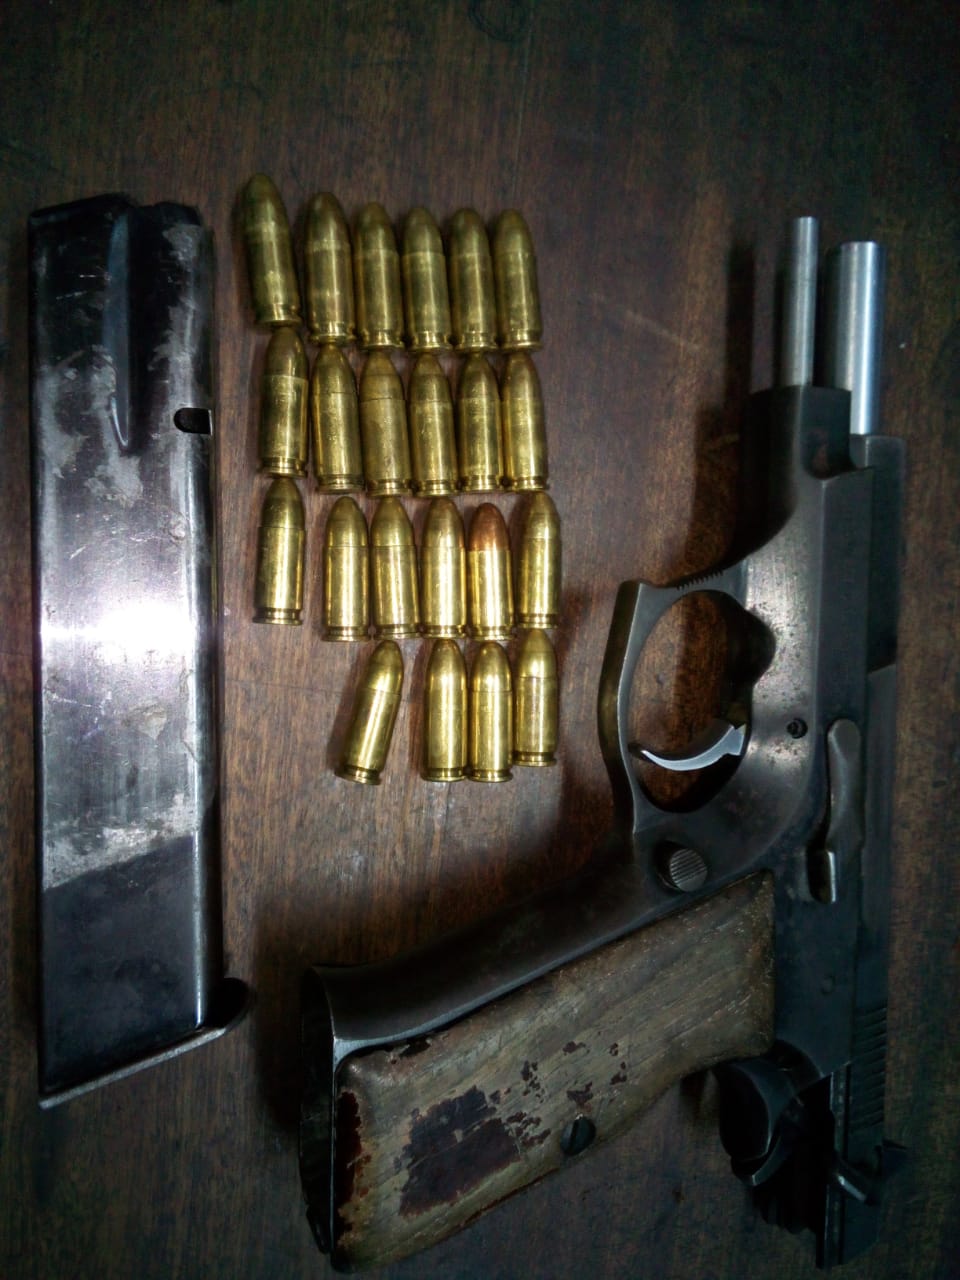 Three men nabbed with firearms and ammunition